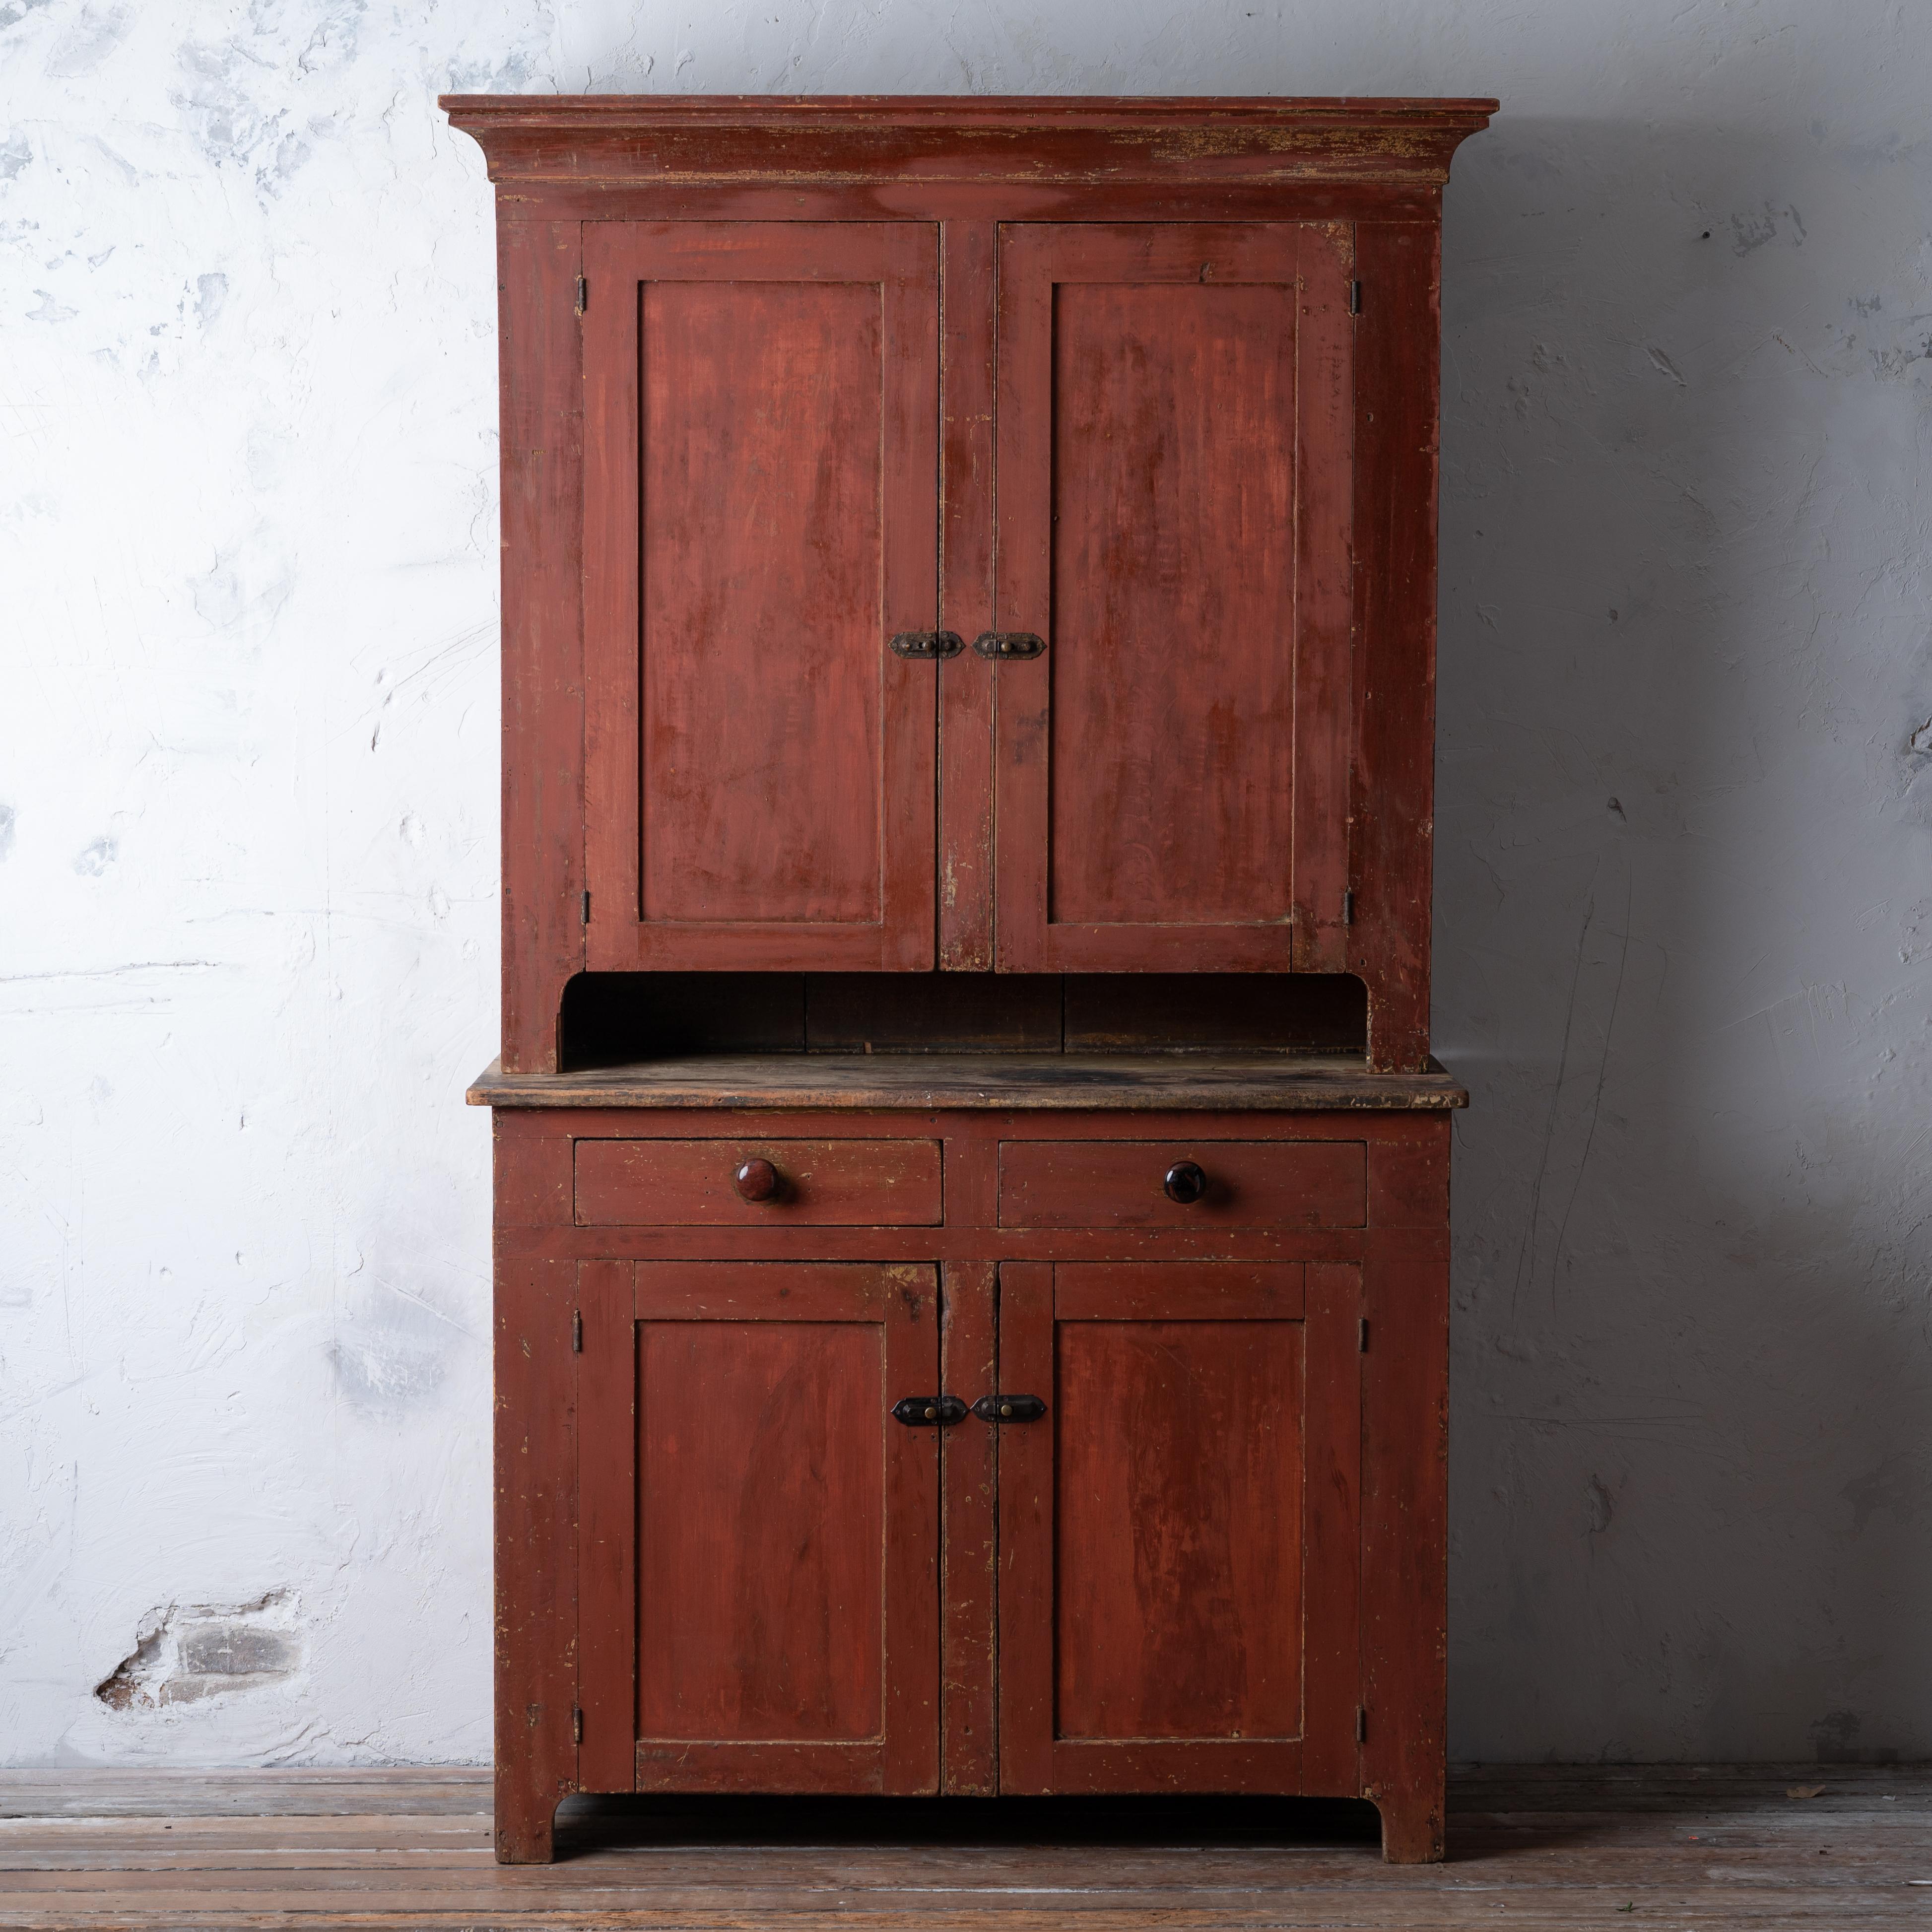 An American primitive painted cupboard, circa 1840s.

47 ¼ inches wide by 21 inches deep by 83 ¾ inches tall;

height of lower cabinet 37 inches;

upper shelves 10 inches deep, lower shelves 18 inches deep

